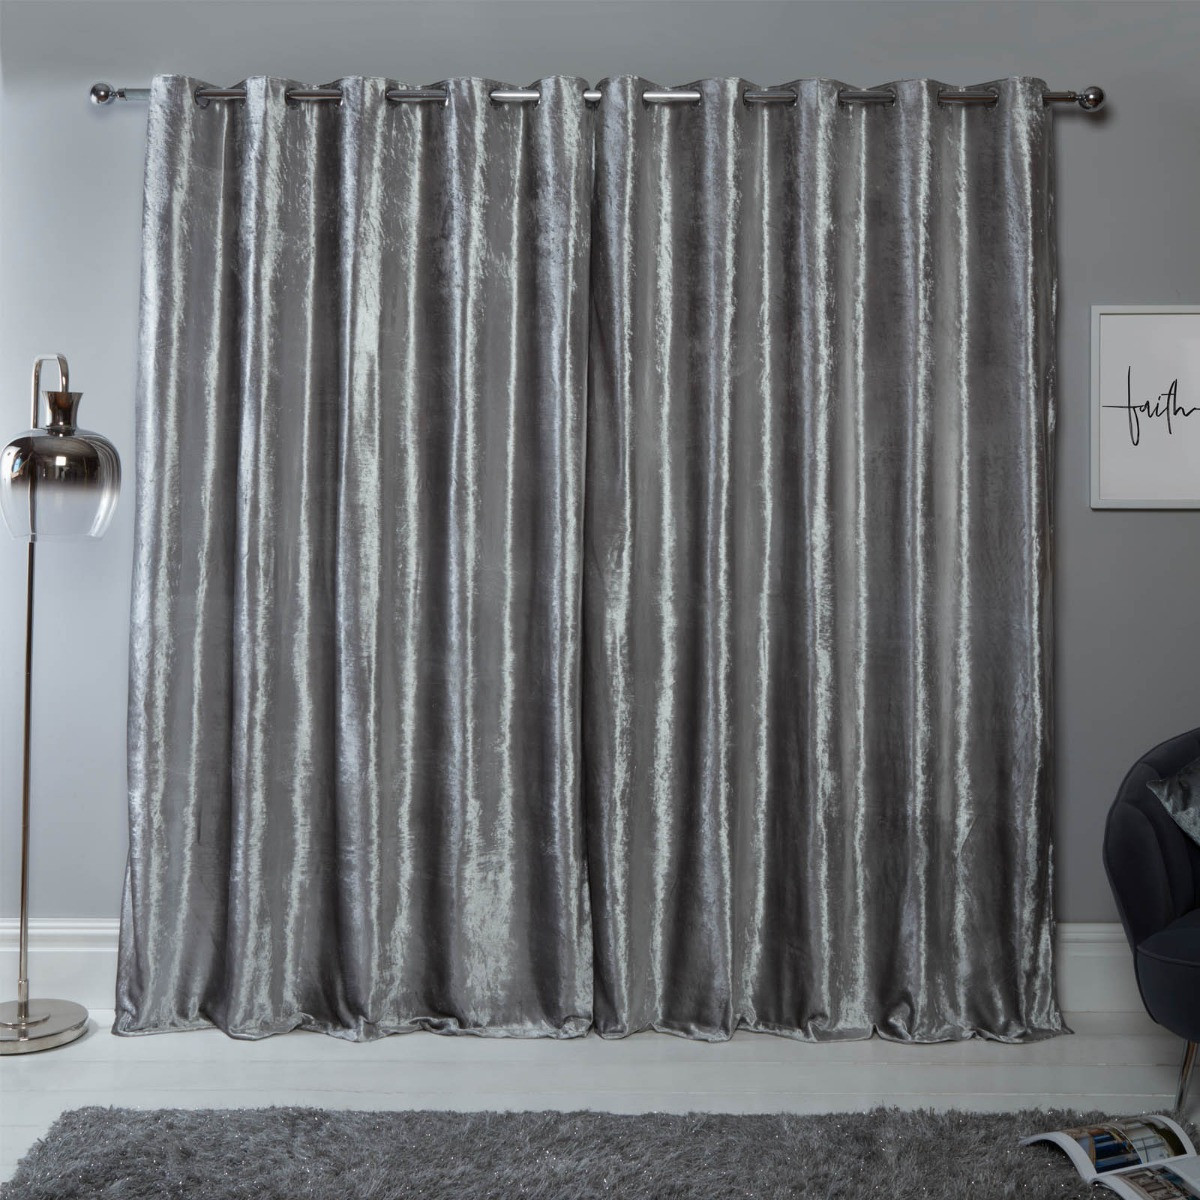 Sienna Home Crushed Velvet Eyelet Curtains - Silver 46" x 54">